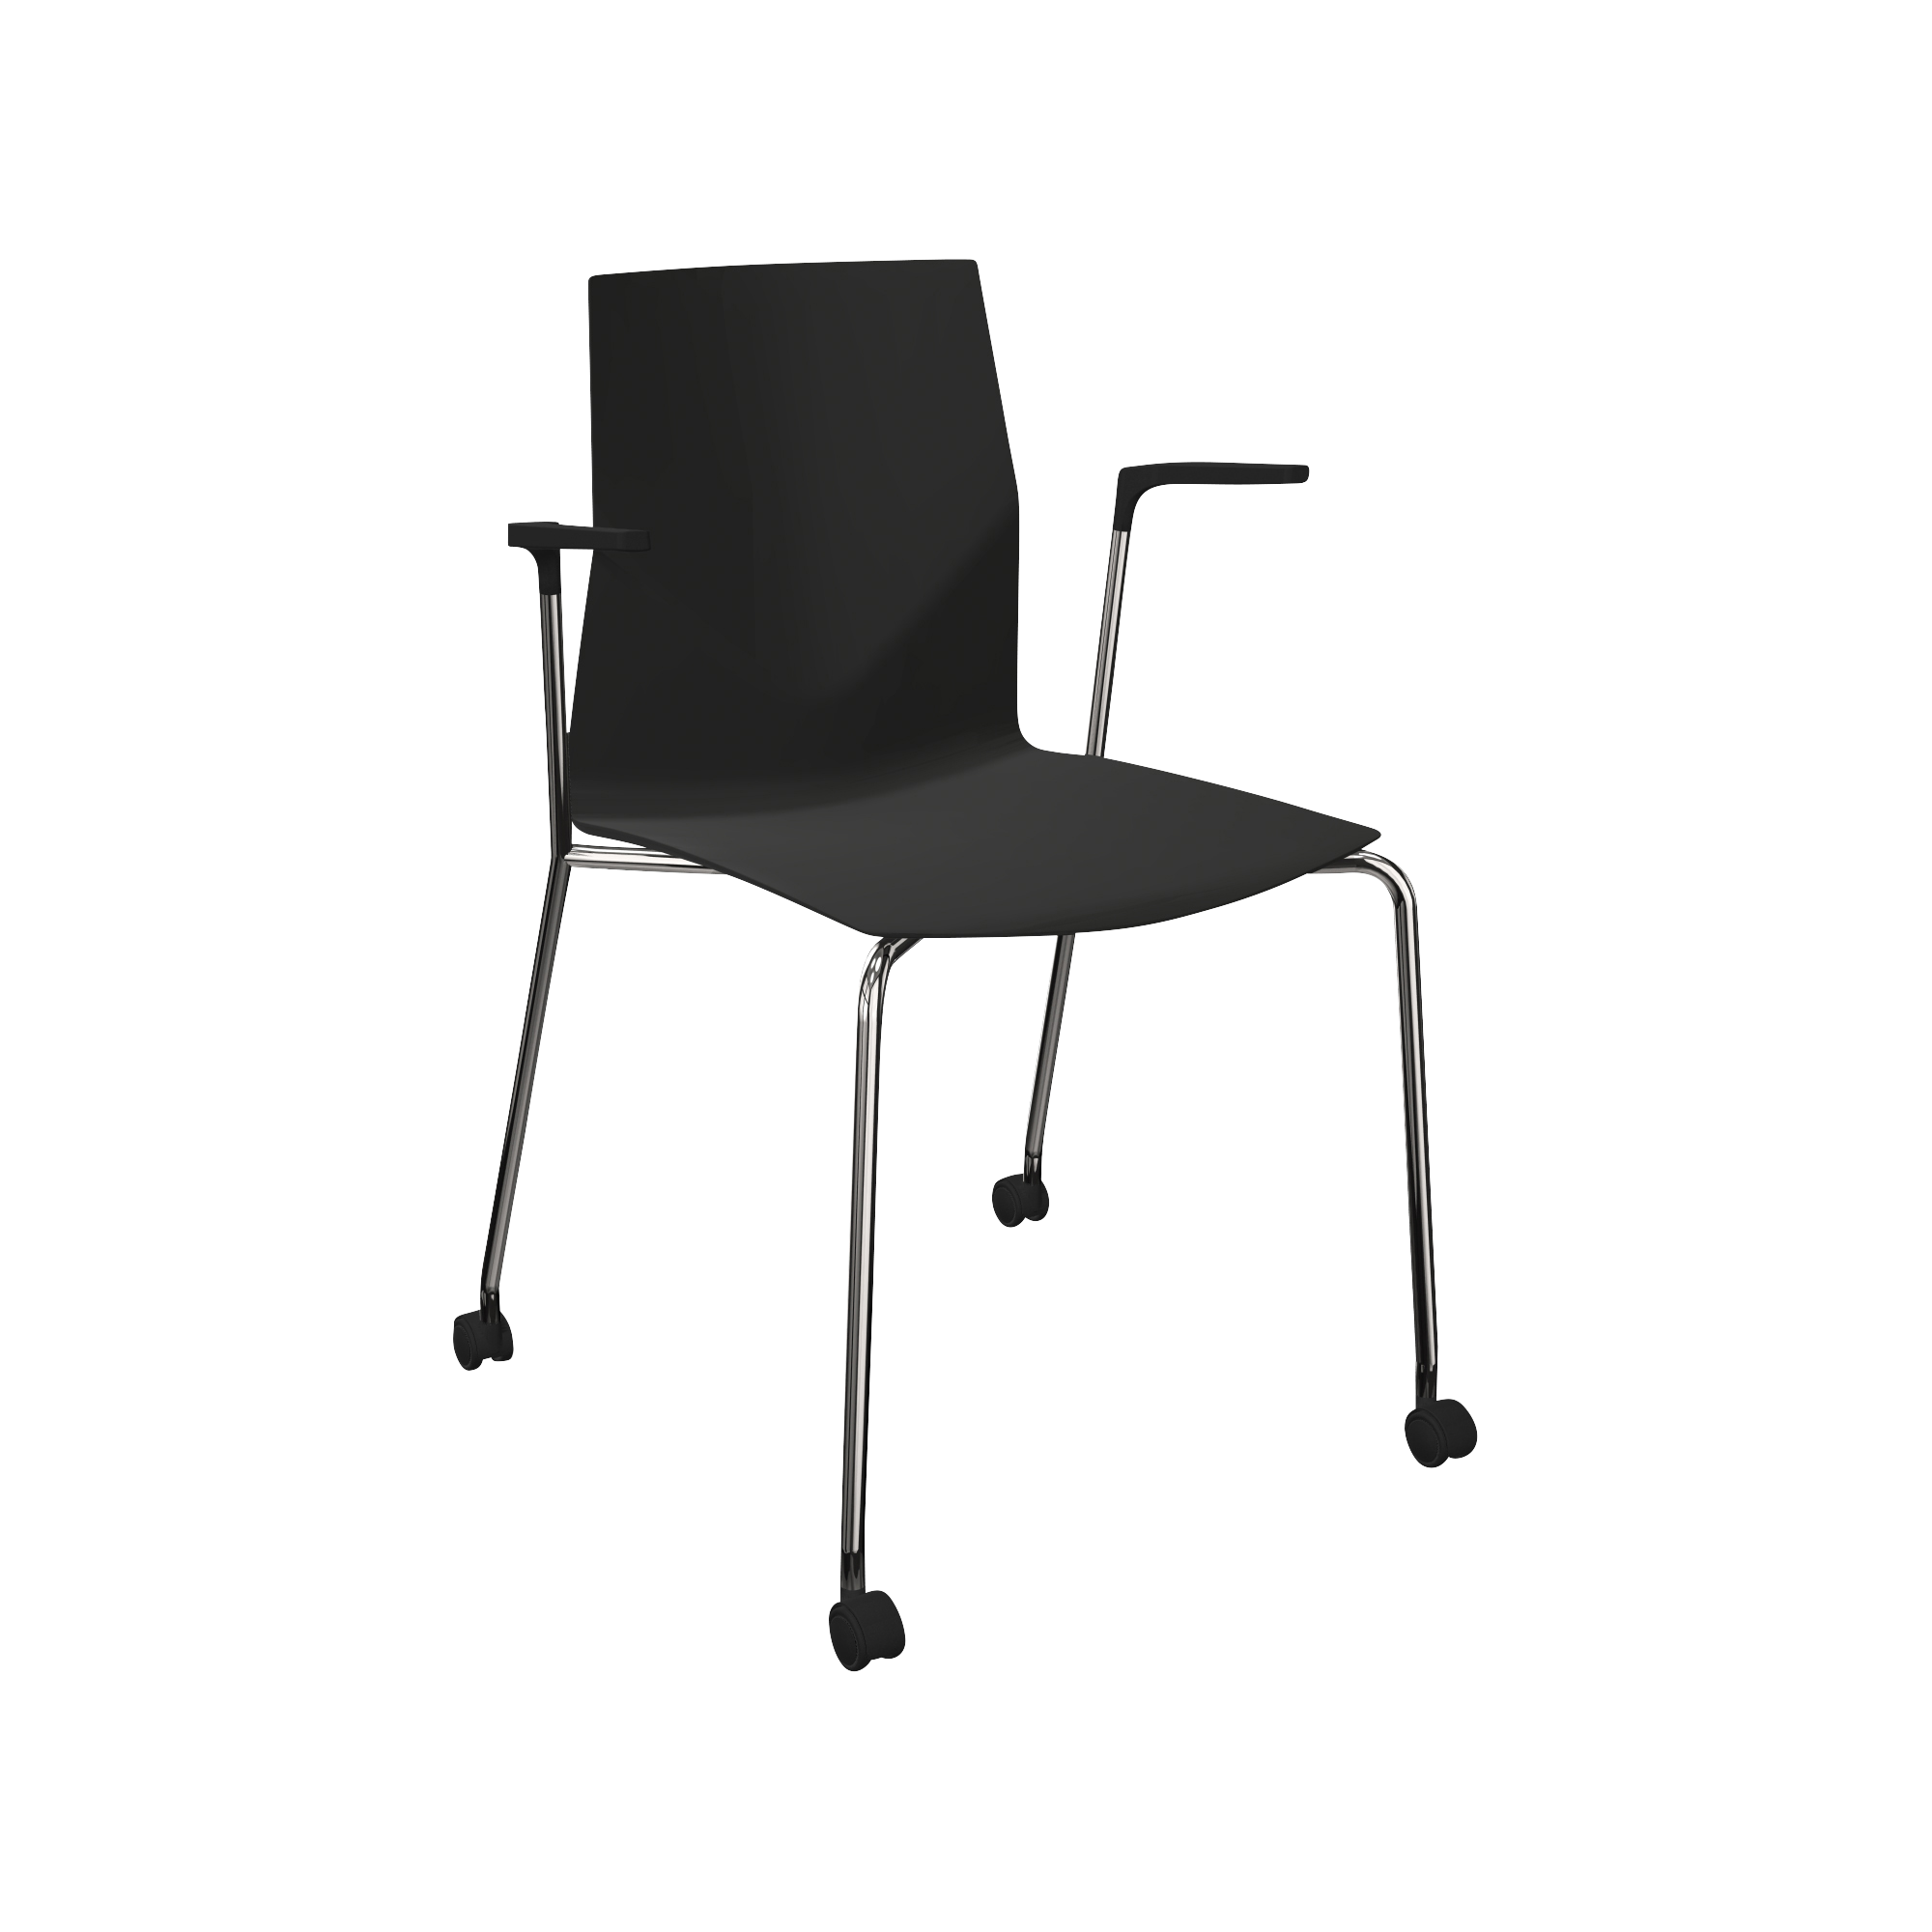 A black chair with wheels